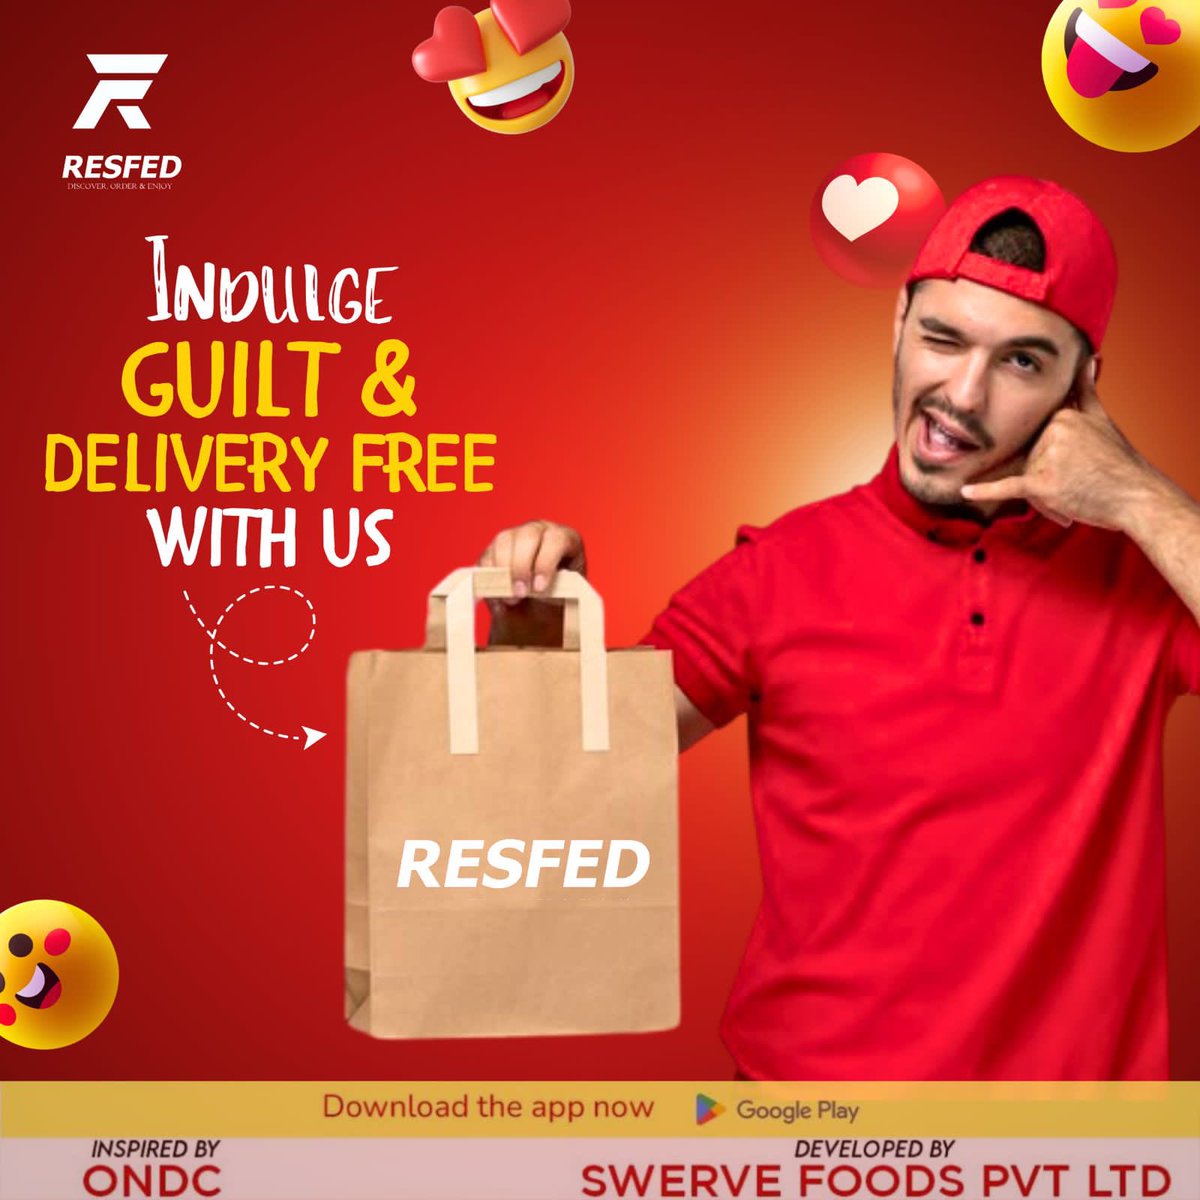 Indulge guilt-free and delivery-free with Resfed! 🍔🚫 No guilt, no delivery fees – just pure satisfaction. Download the app and order now! 

#ResfedDelivers #GuiltFreeIndulgence #FoodDelivery #OrderNow #NoDeliveryFees #FoodieLife #DeliciousDeliveries